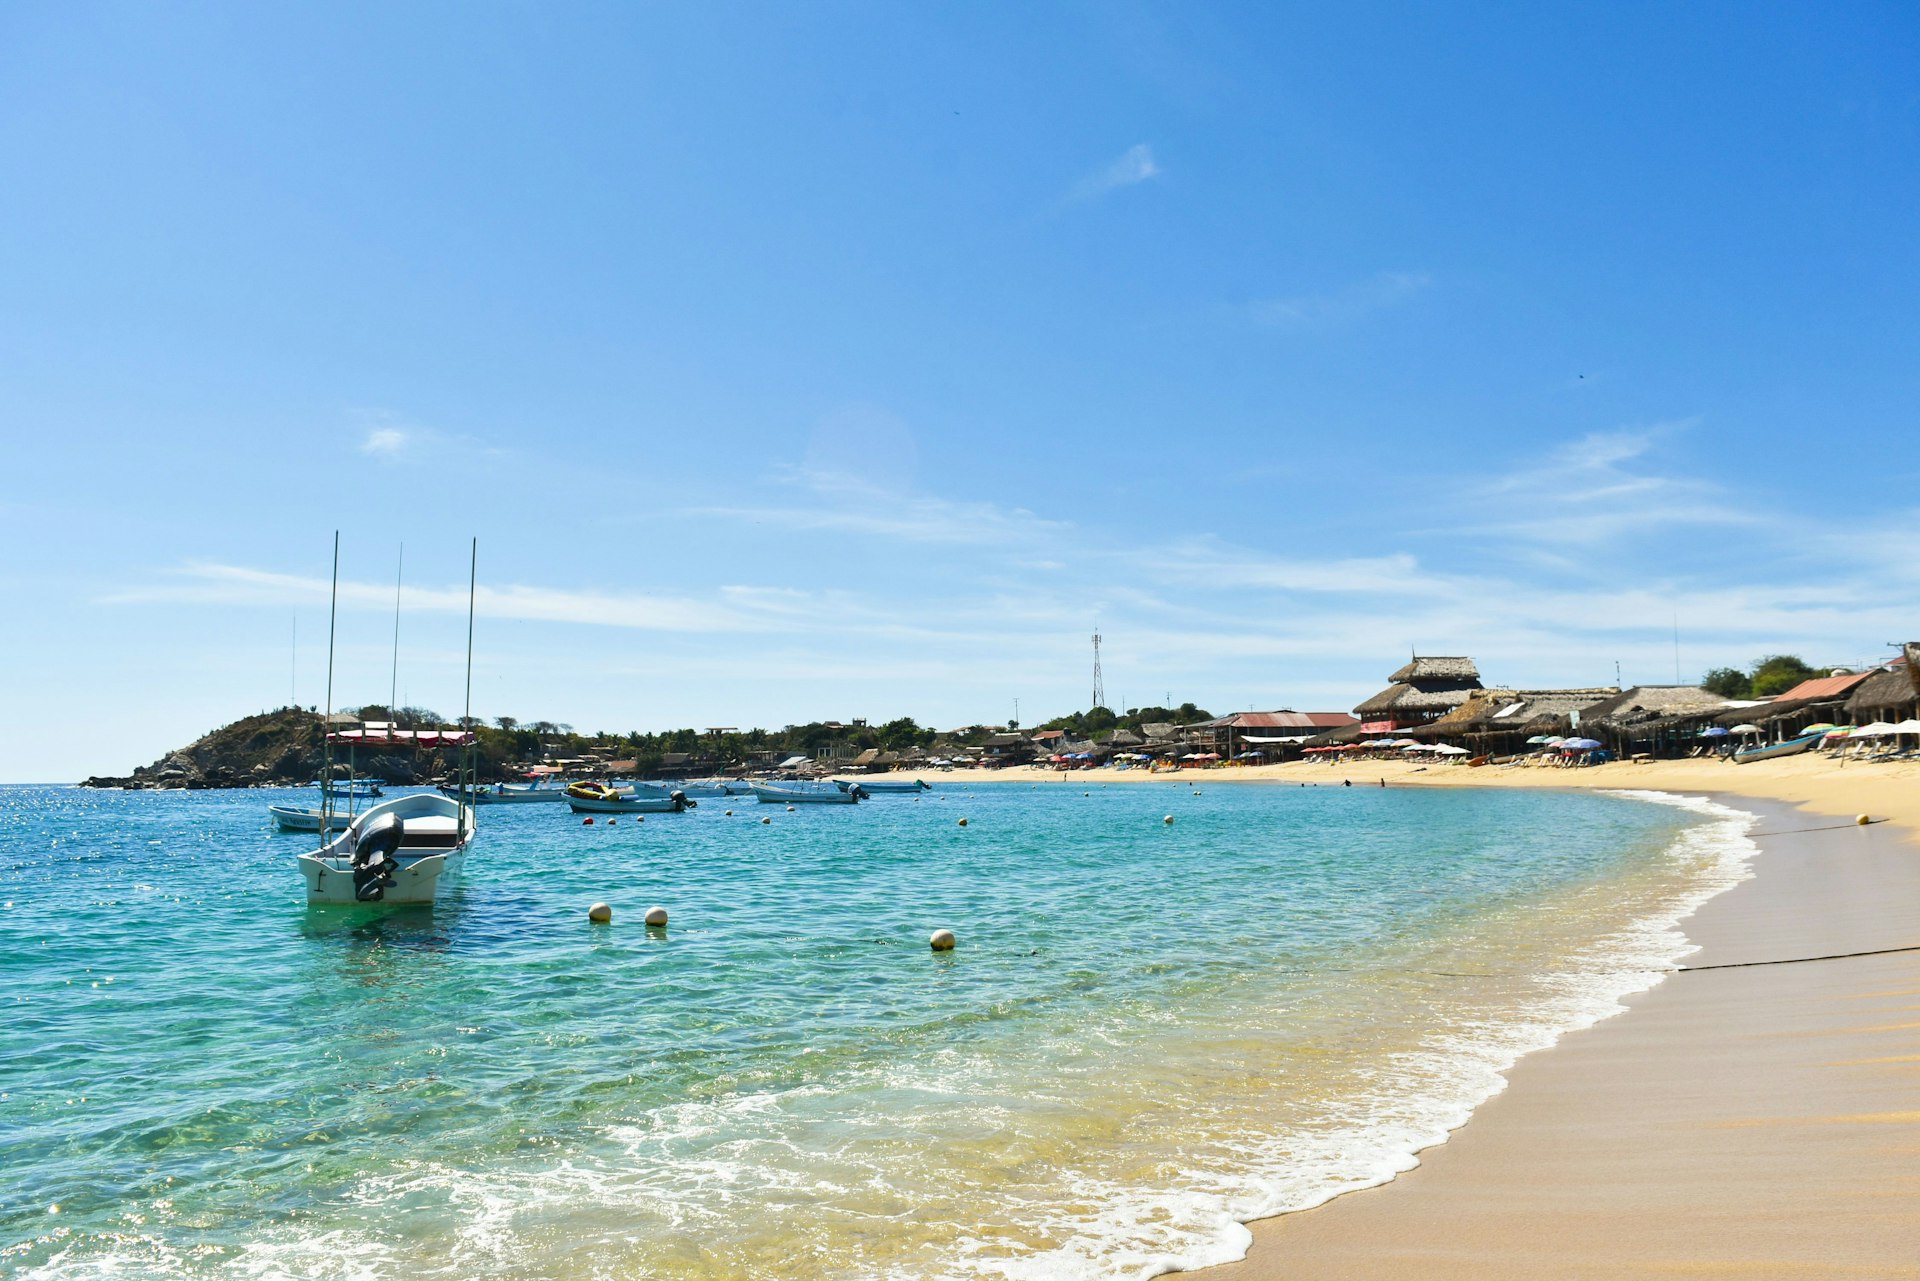 A picturesque beach scene under a clear blue sky. The sandy shore gently meets the calm turquoise waters, where a few small boats are anchored, bobbing with the waves.